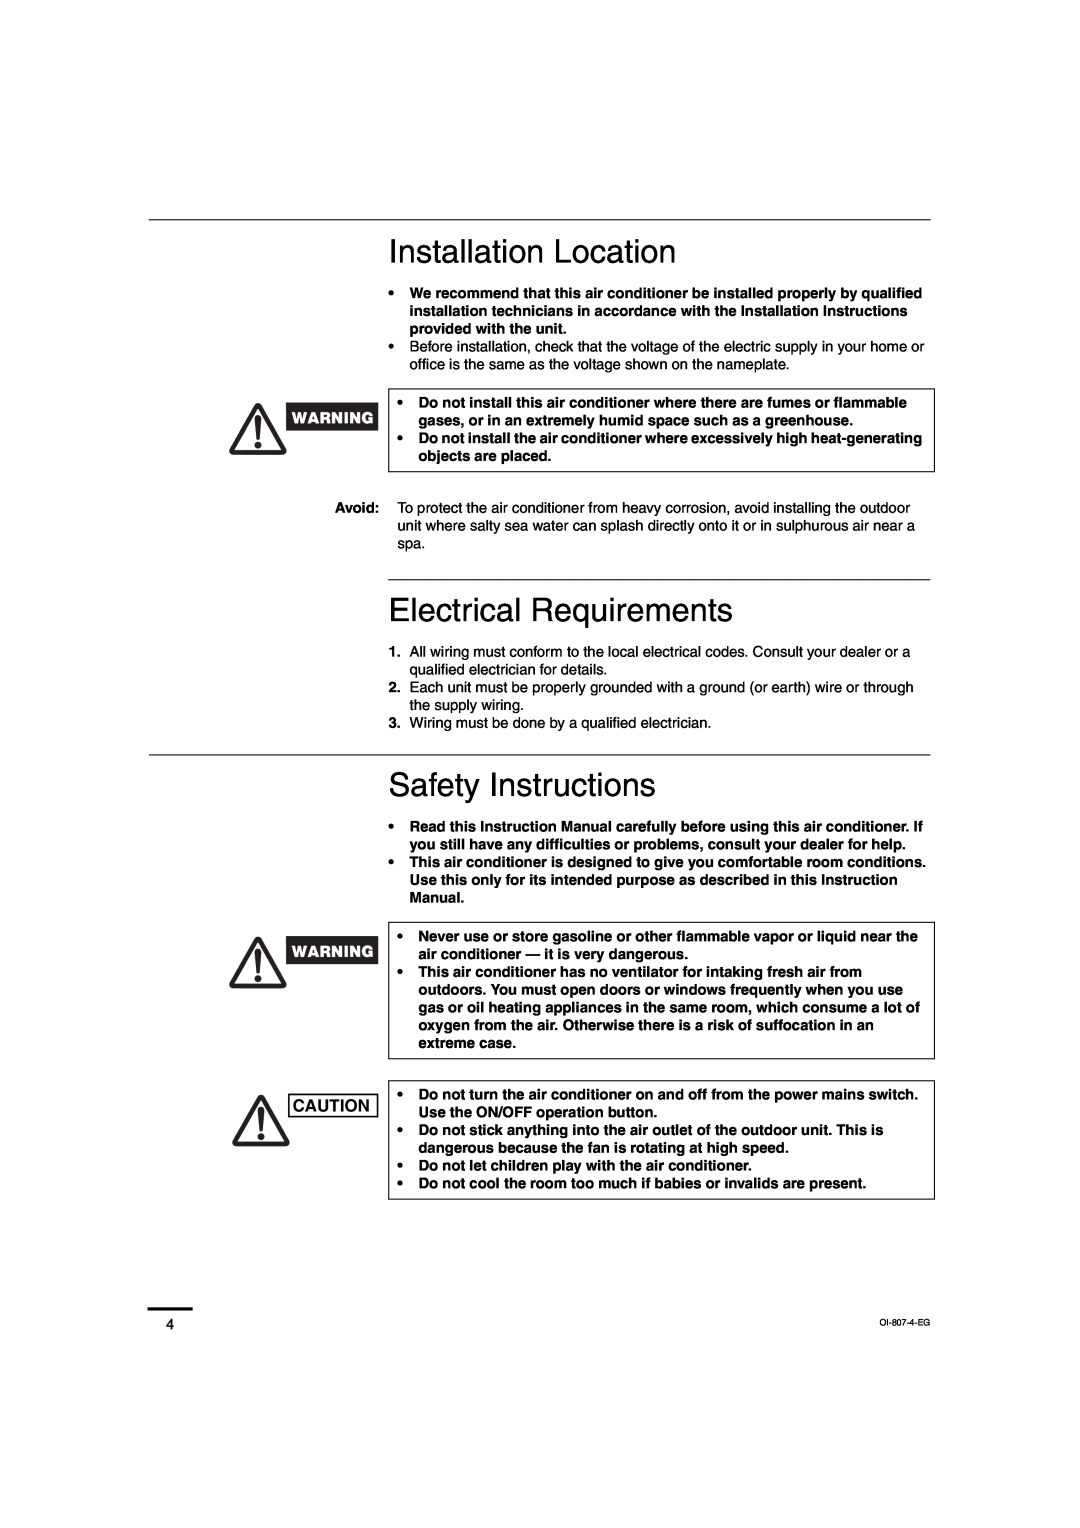 Sanyo KMS2472, KMS1872 service manual Installation Location, Electrical Requirements, Safety Instructions 